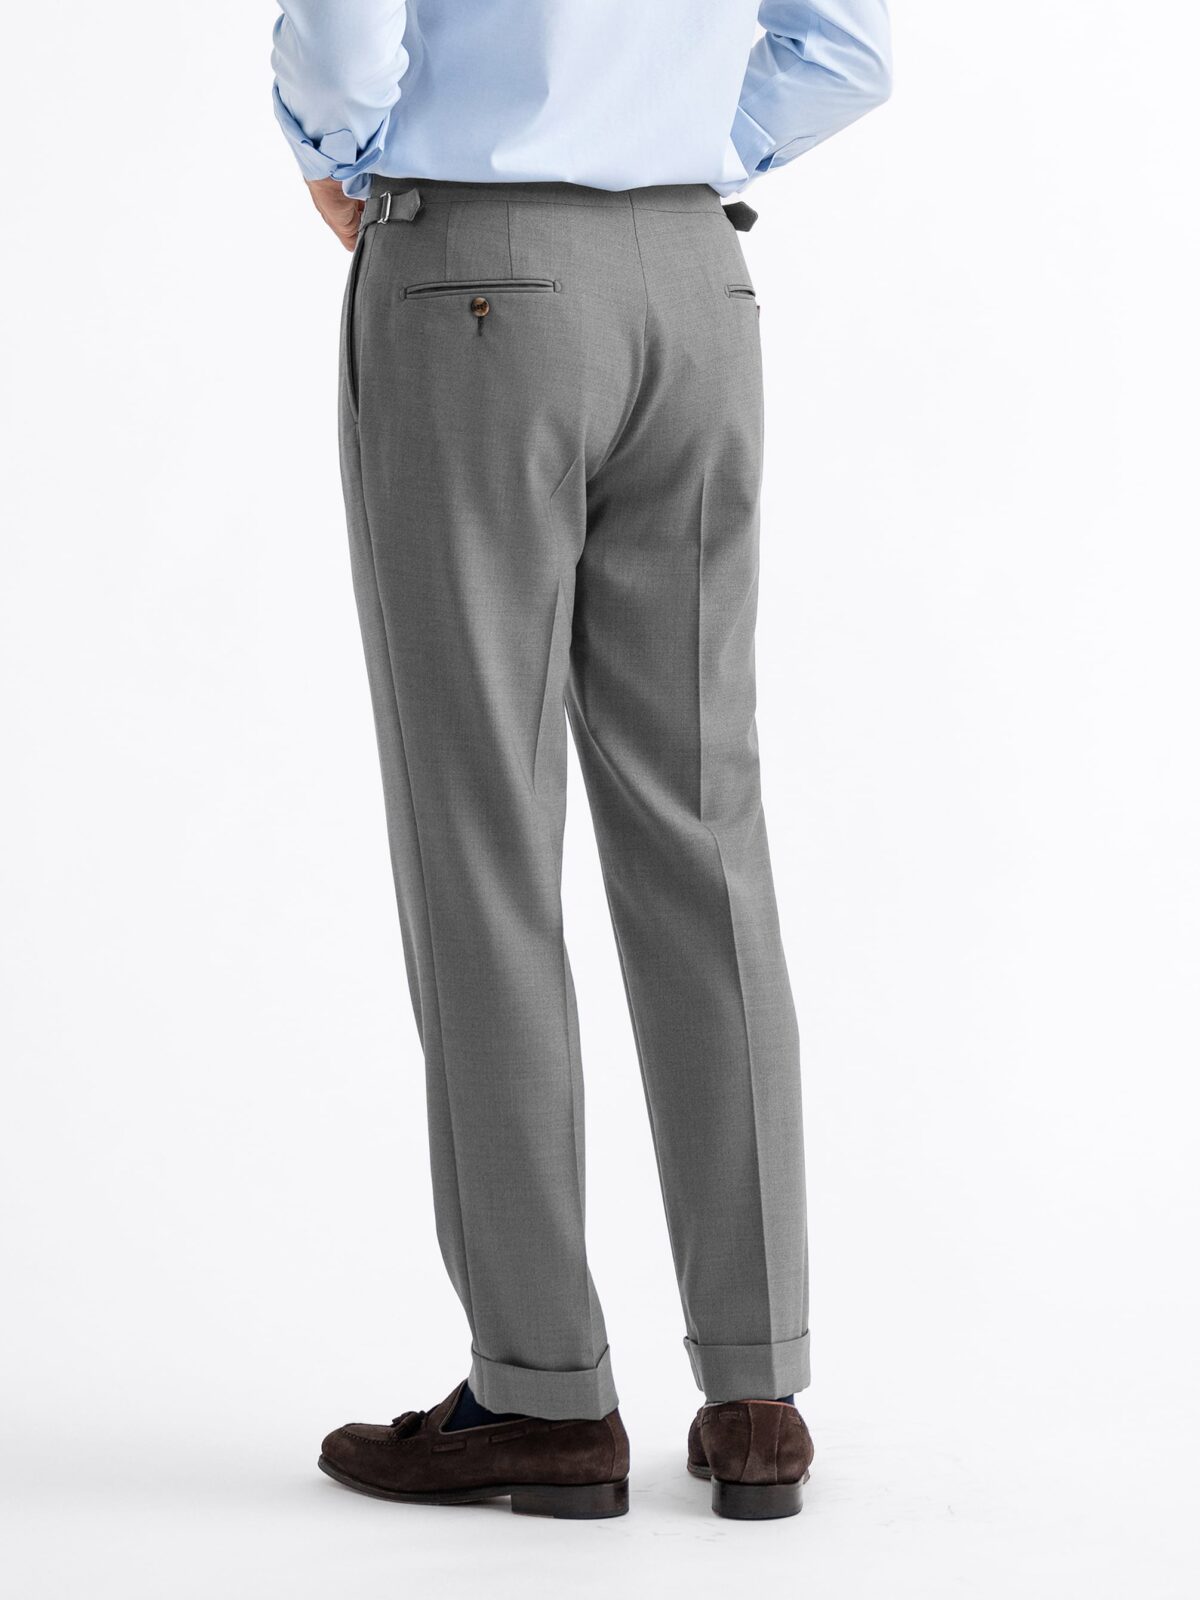 Light Grey Cotton and Linen Dress Pant - Custom Fit Tailored Clothing